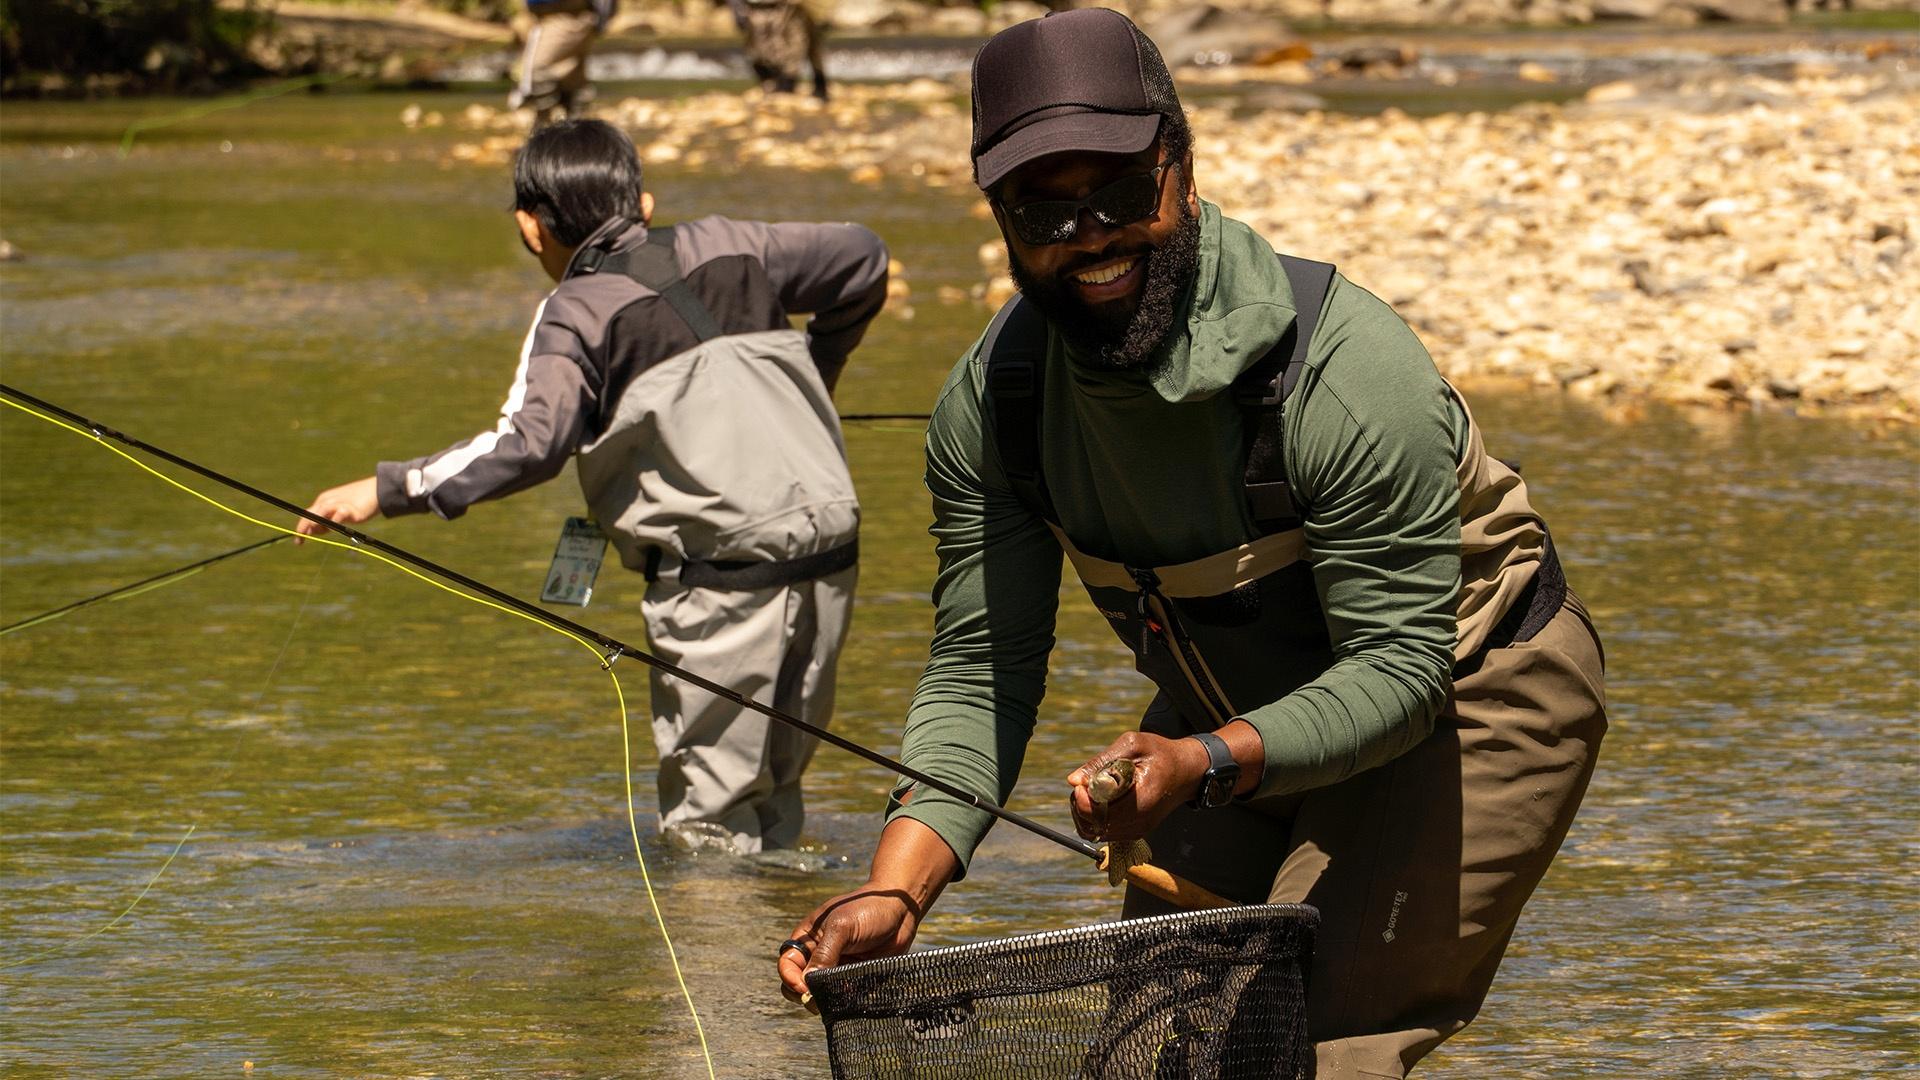 Baratunde holding net while fly fishing with child in background